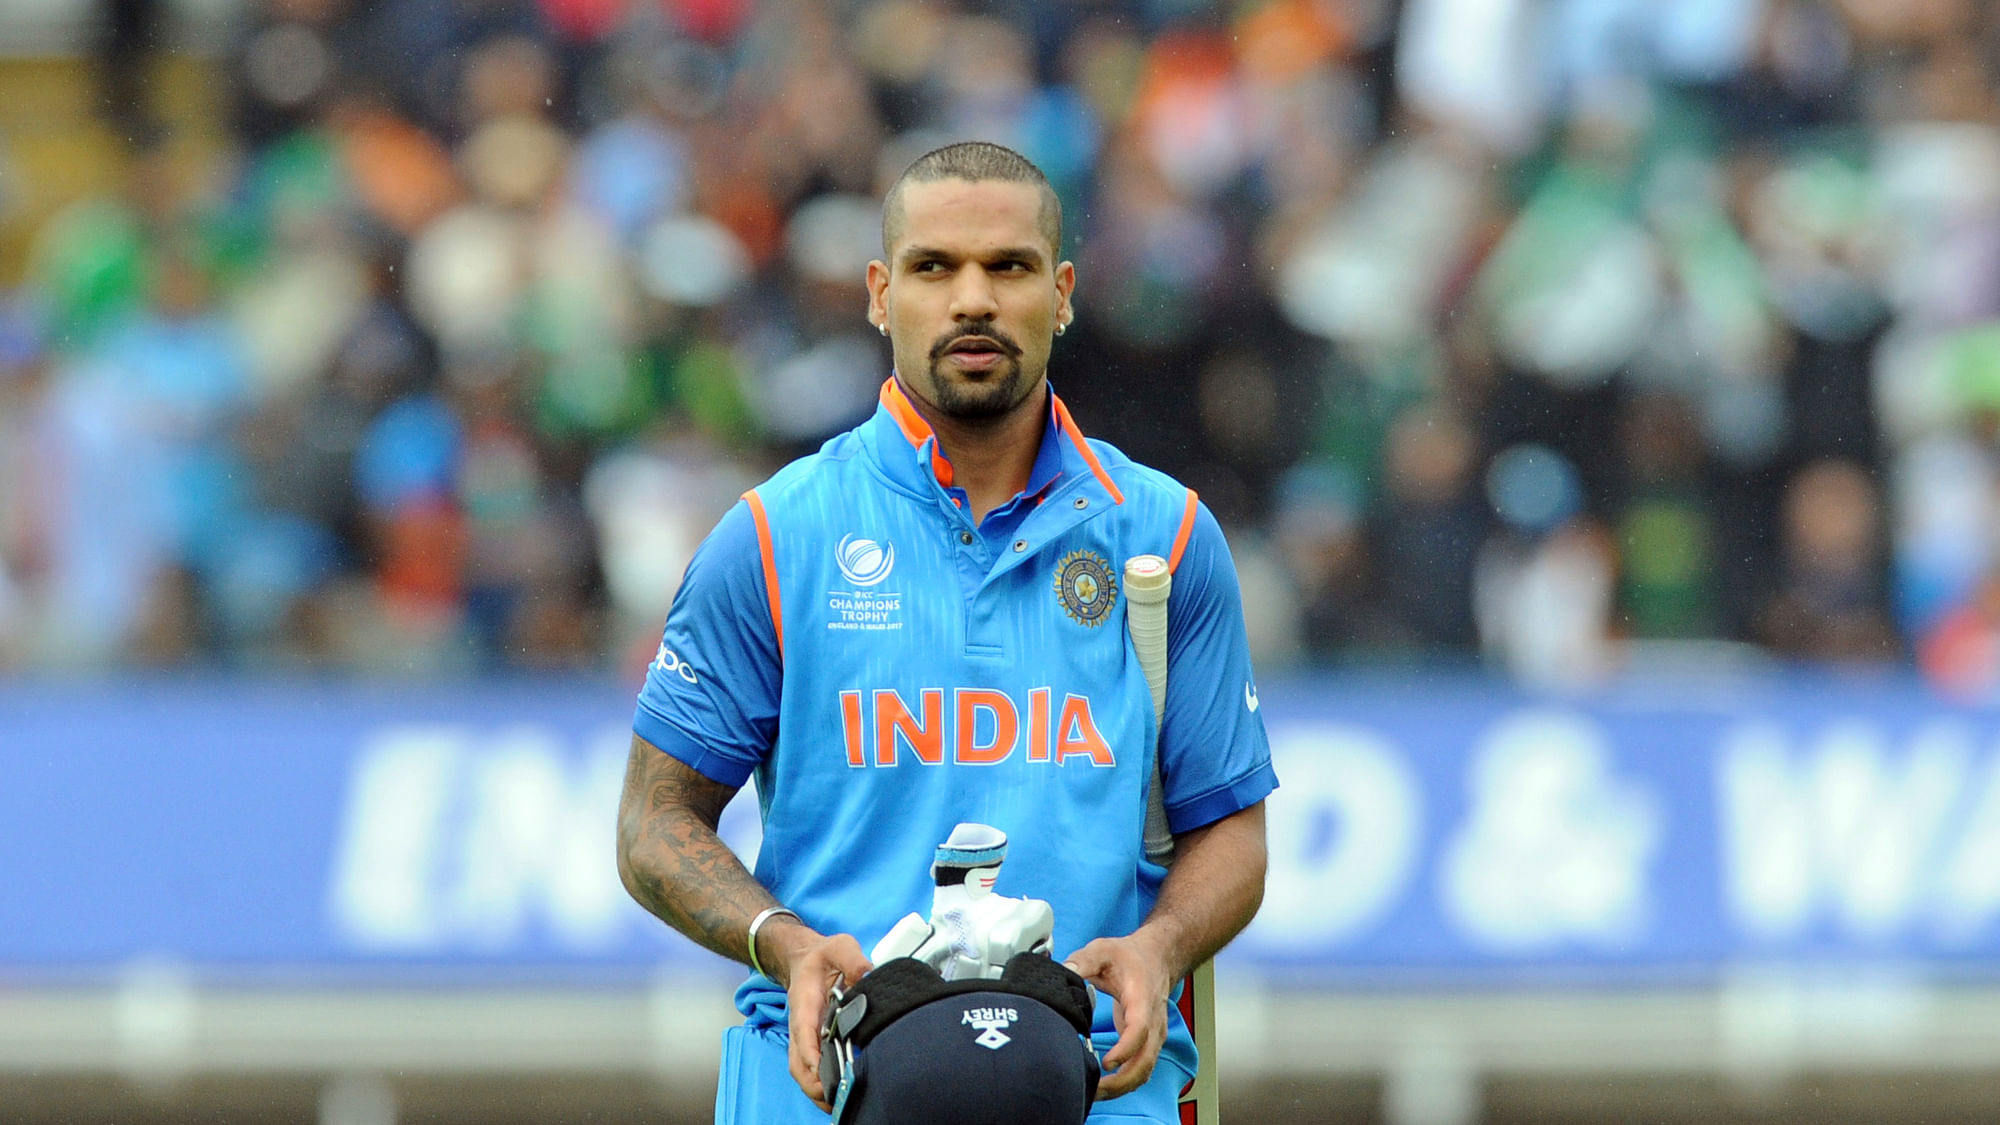 Opener Shikhar Dhawan was back amongst the runs with a brisk 52 off 43 balls.